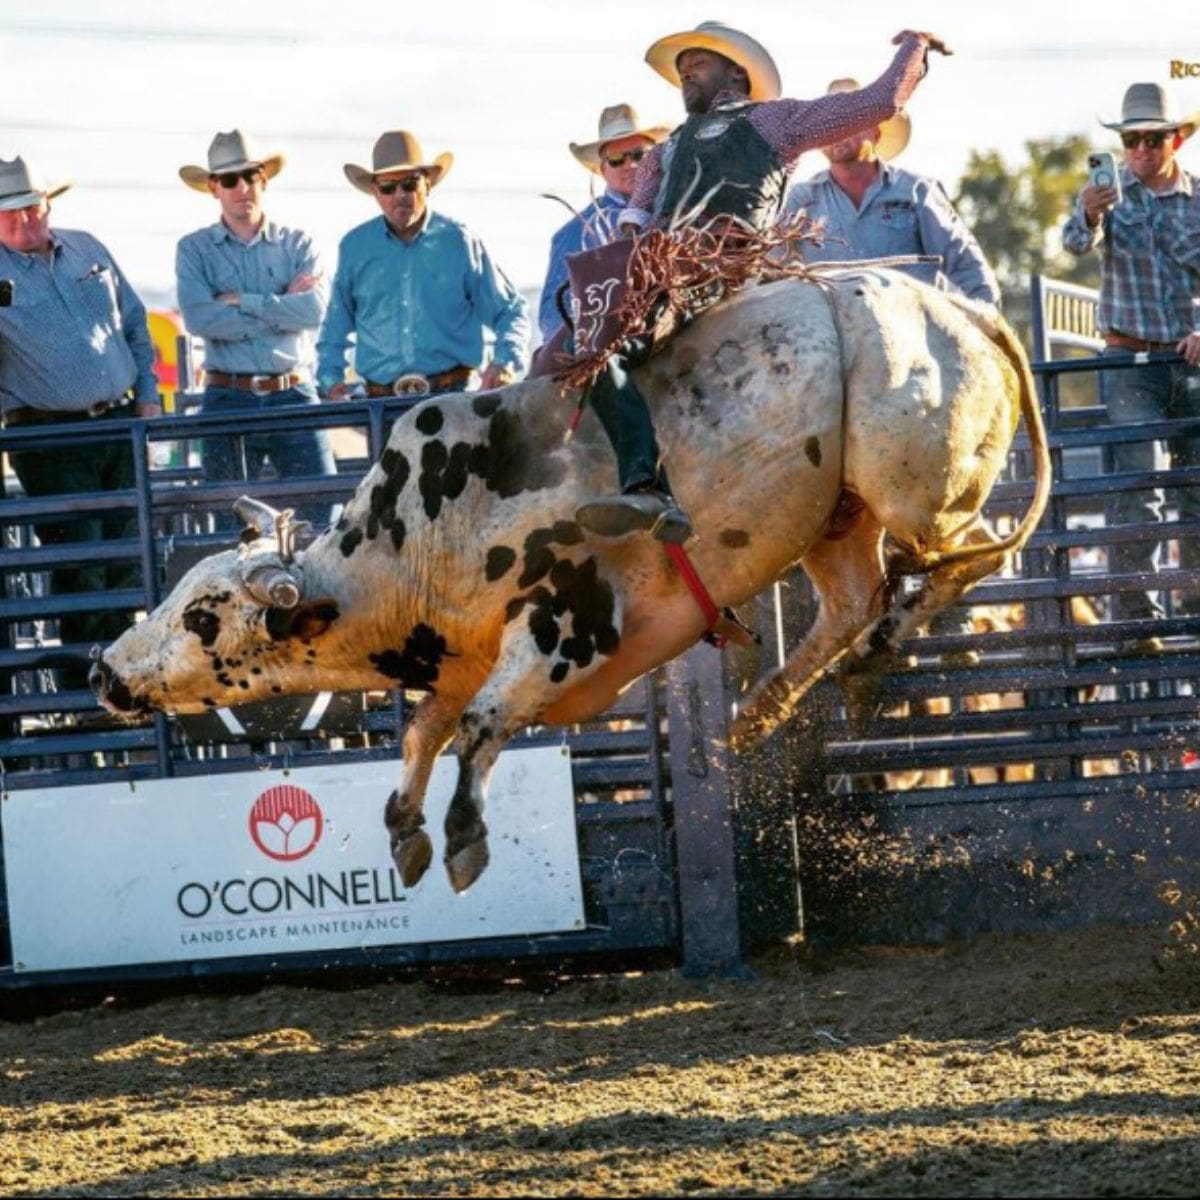 Rancho Mission Viejo Rodeo